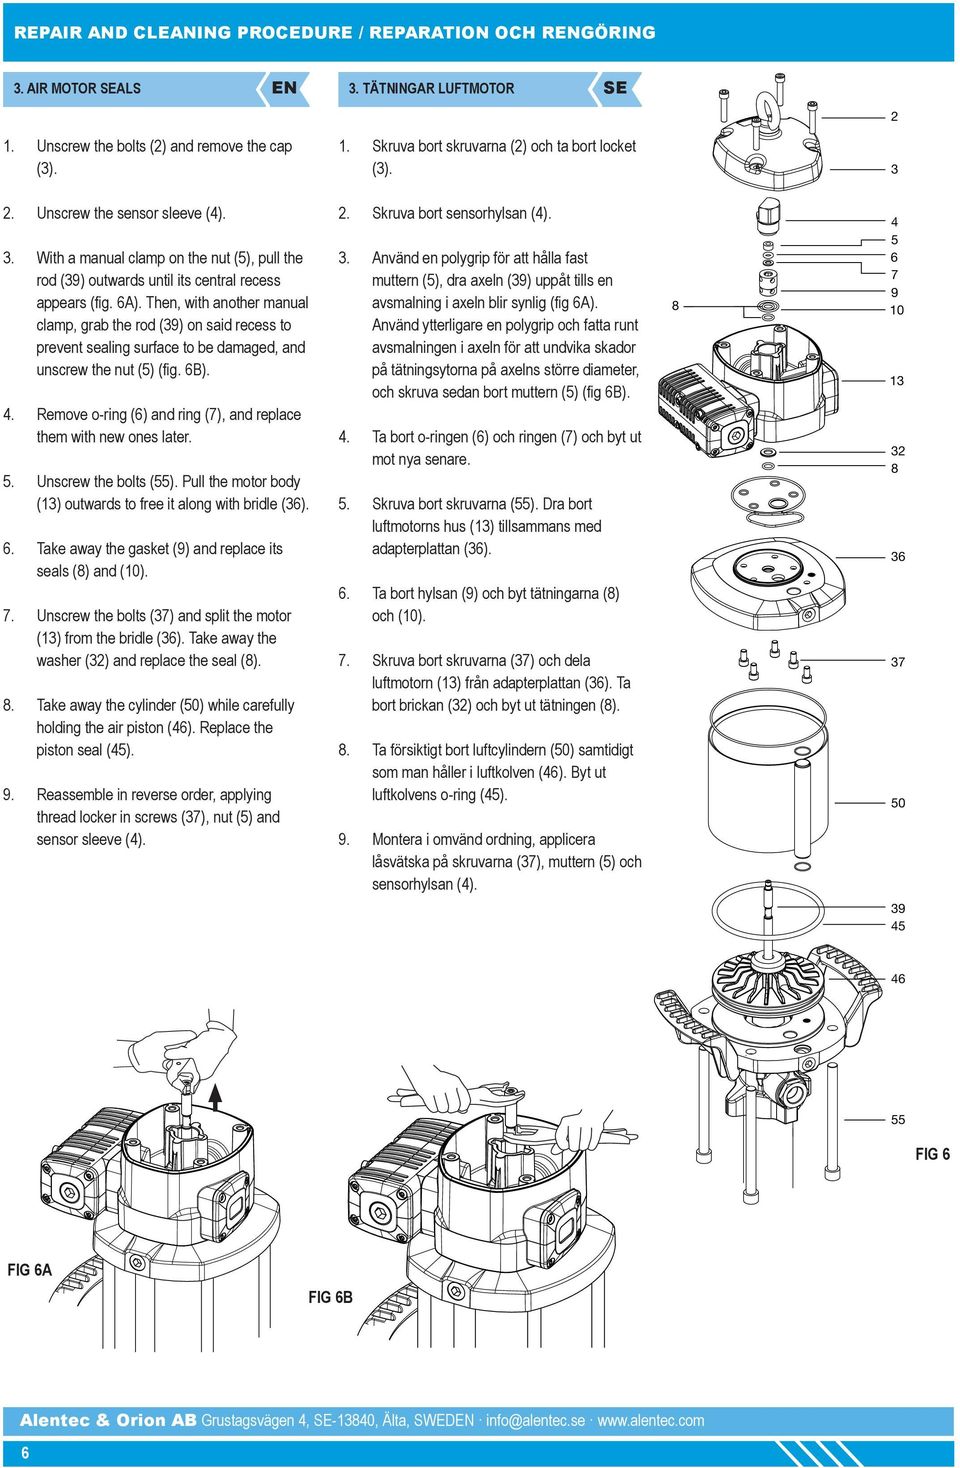 Then, with another manual clamp, grab the rod (39) on said recess to prevent sealing surface to be damaged, and unscrew the nut (5) (fig. 6B). 4.